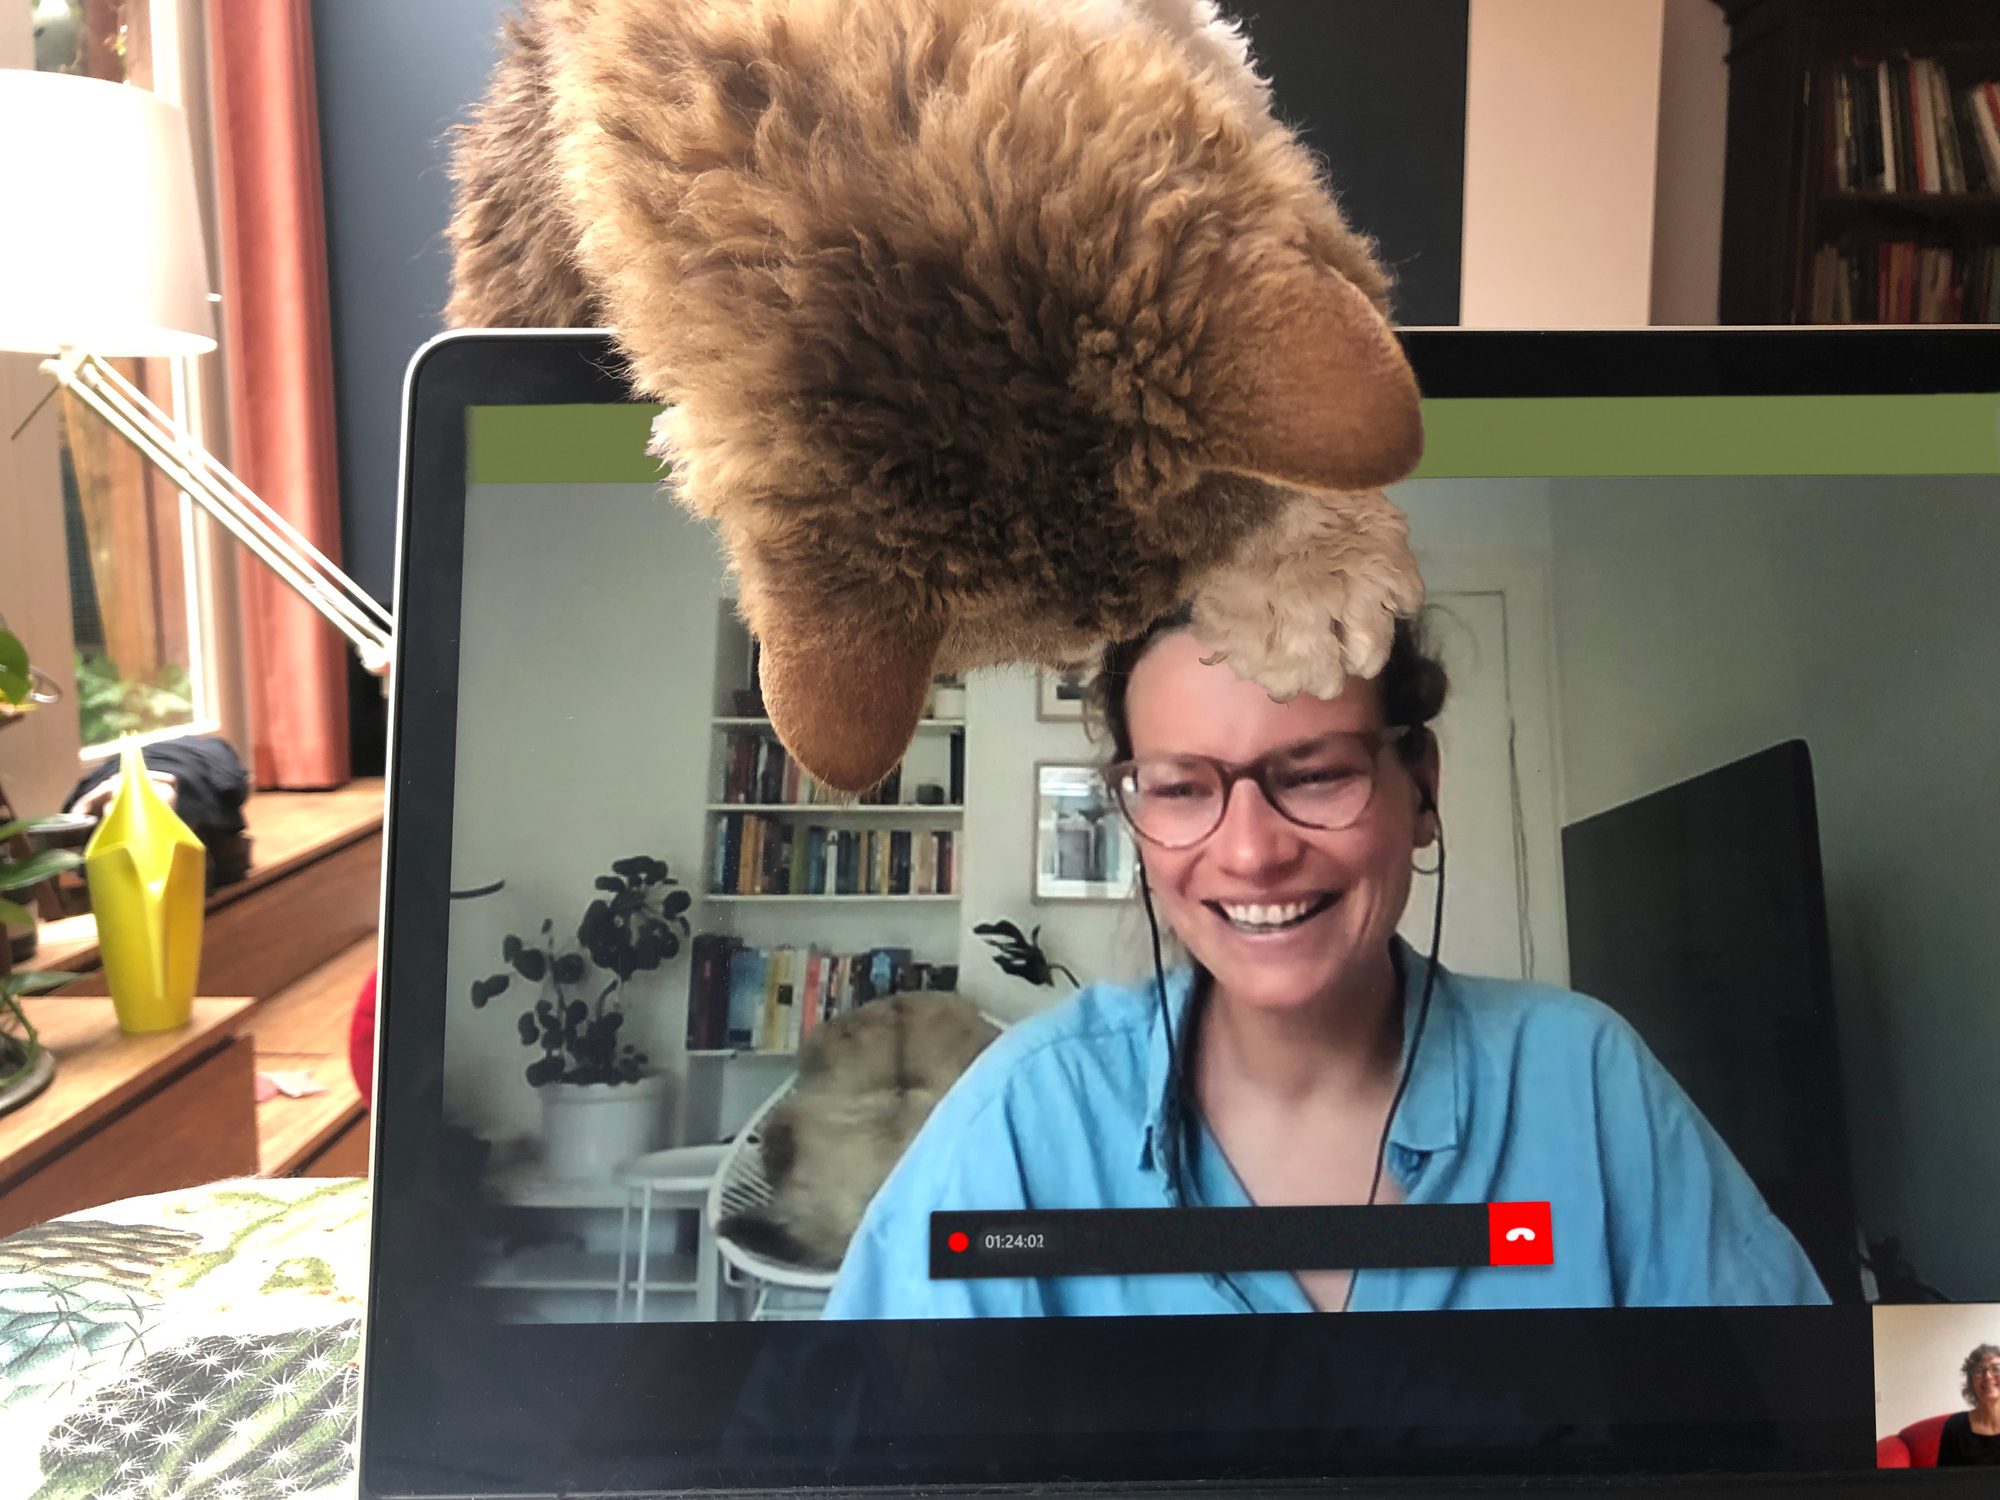 Video call with cat joining in